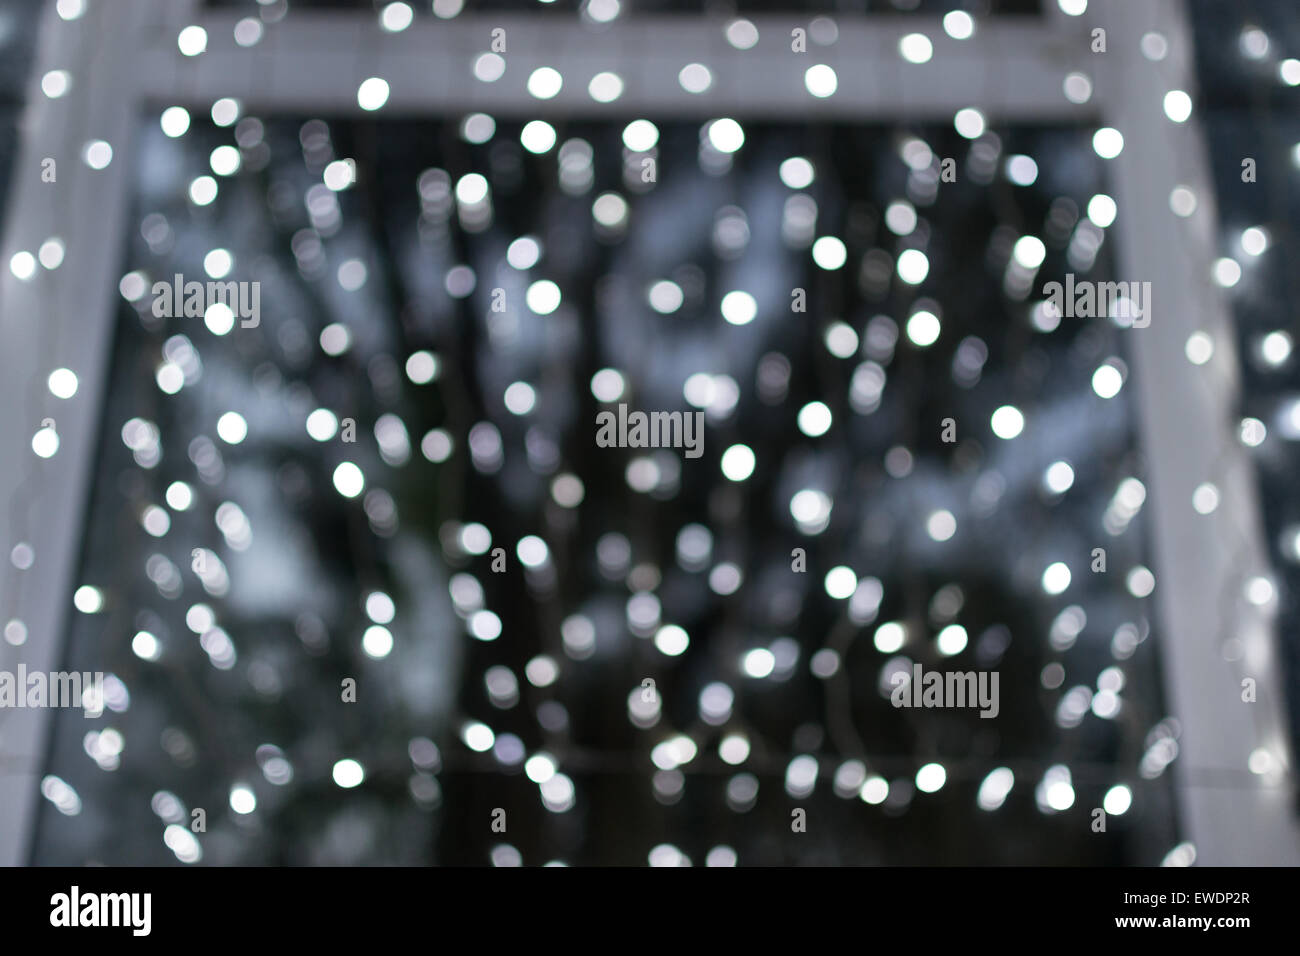 Many blurred white celebration fairy lights create abstract patterns Stock Photo